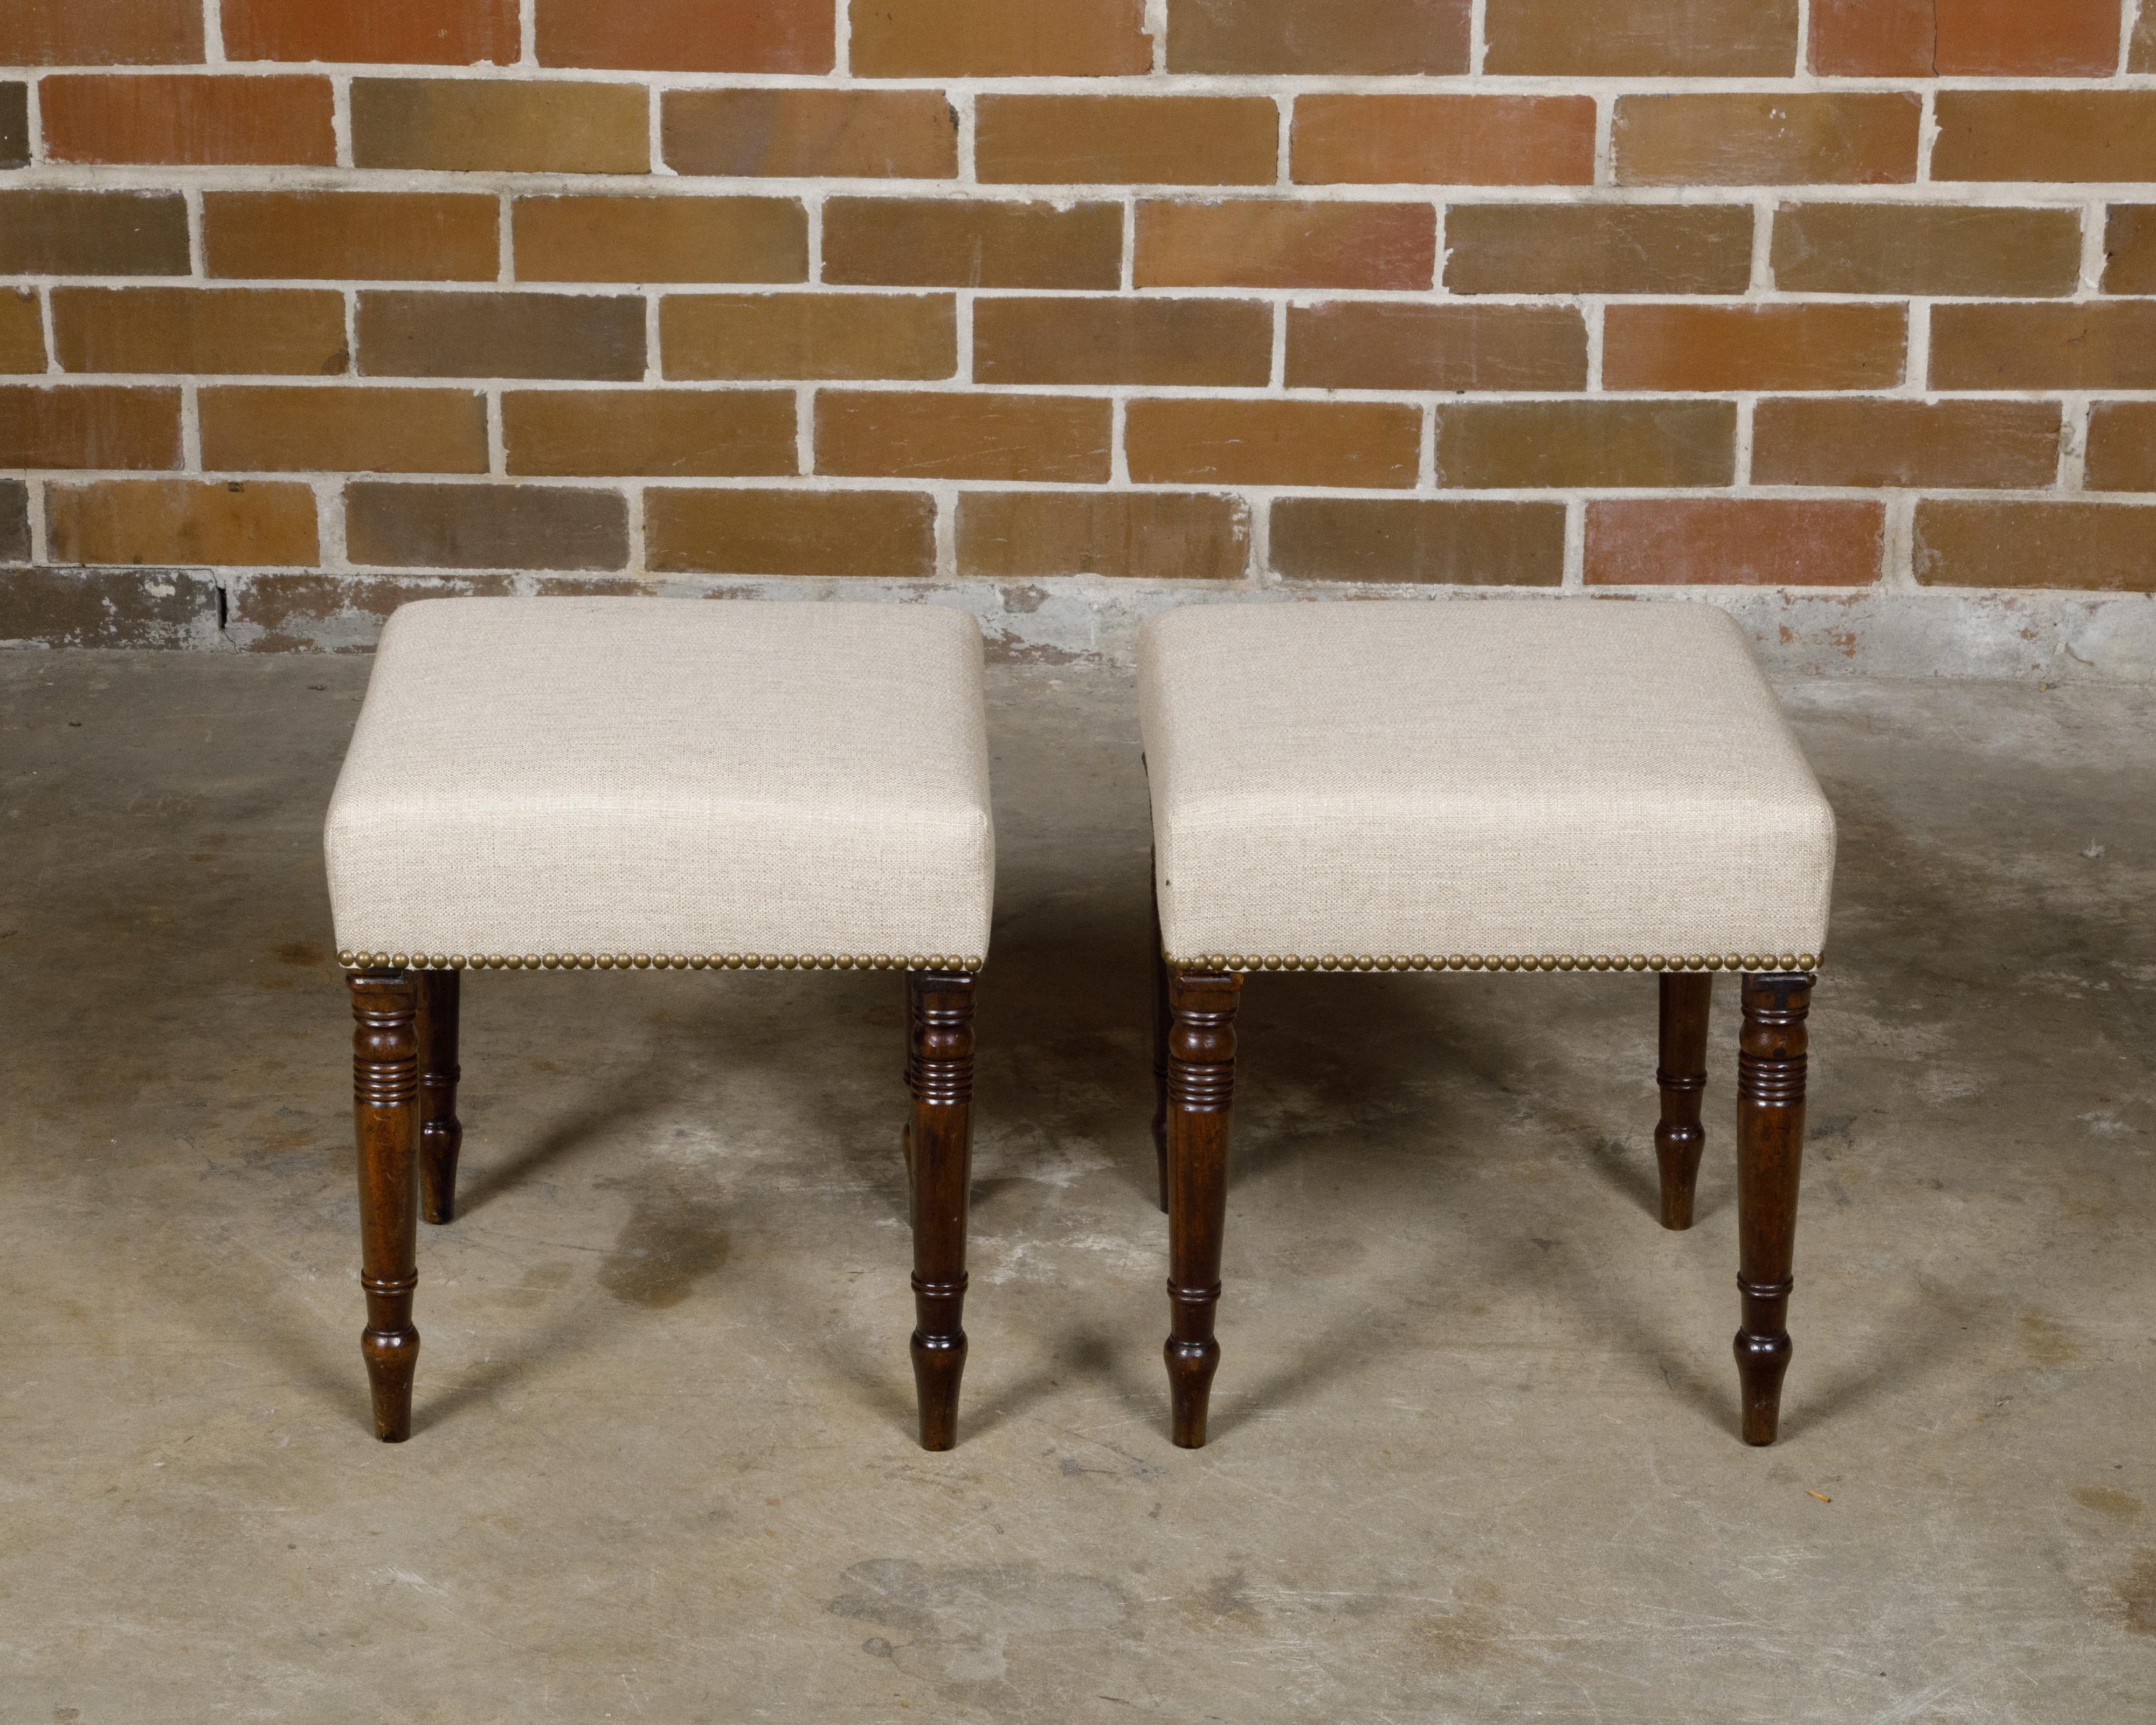 Pair of English Regency 19th Century Mahogany Stools with Turned Spindle Legs For Sale 1